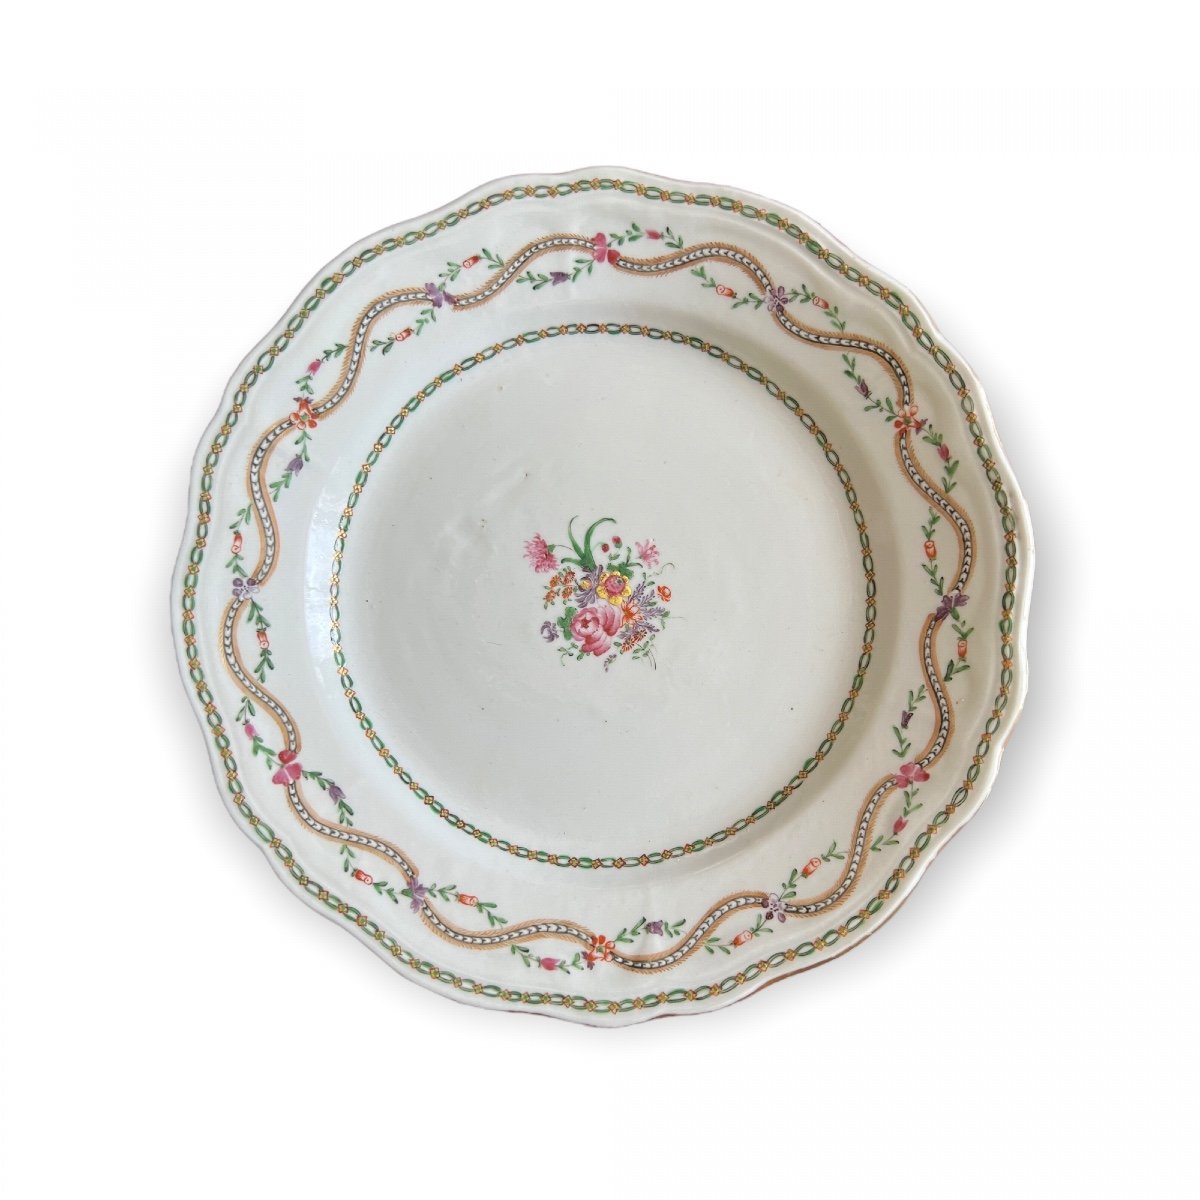 Chinese Export, Compagnie Des Indes, Louis XVI Style Famille Rose Plate, 18th